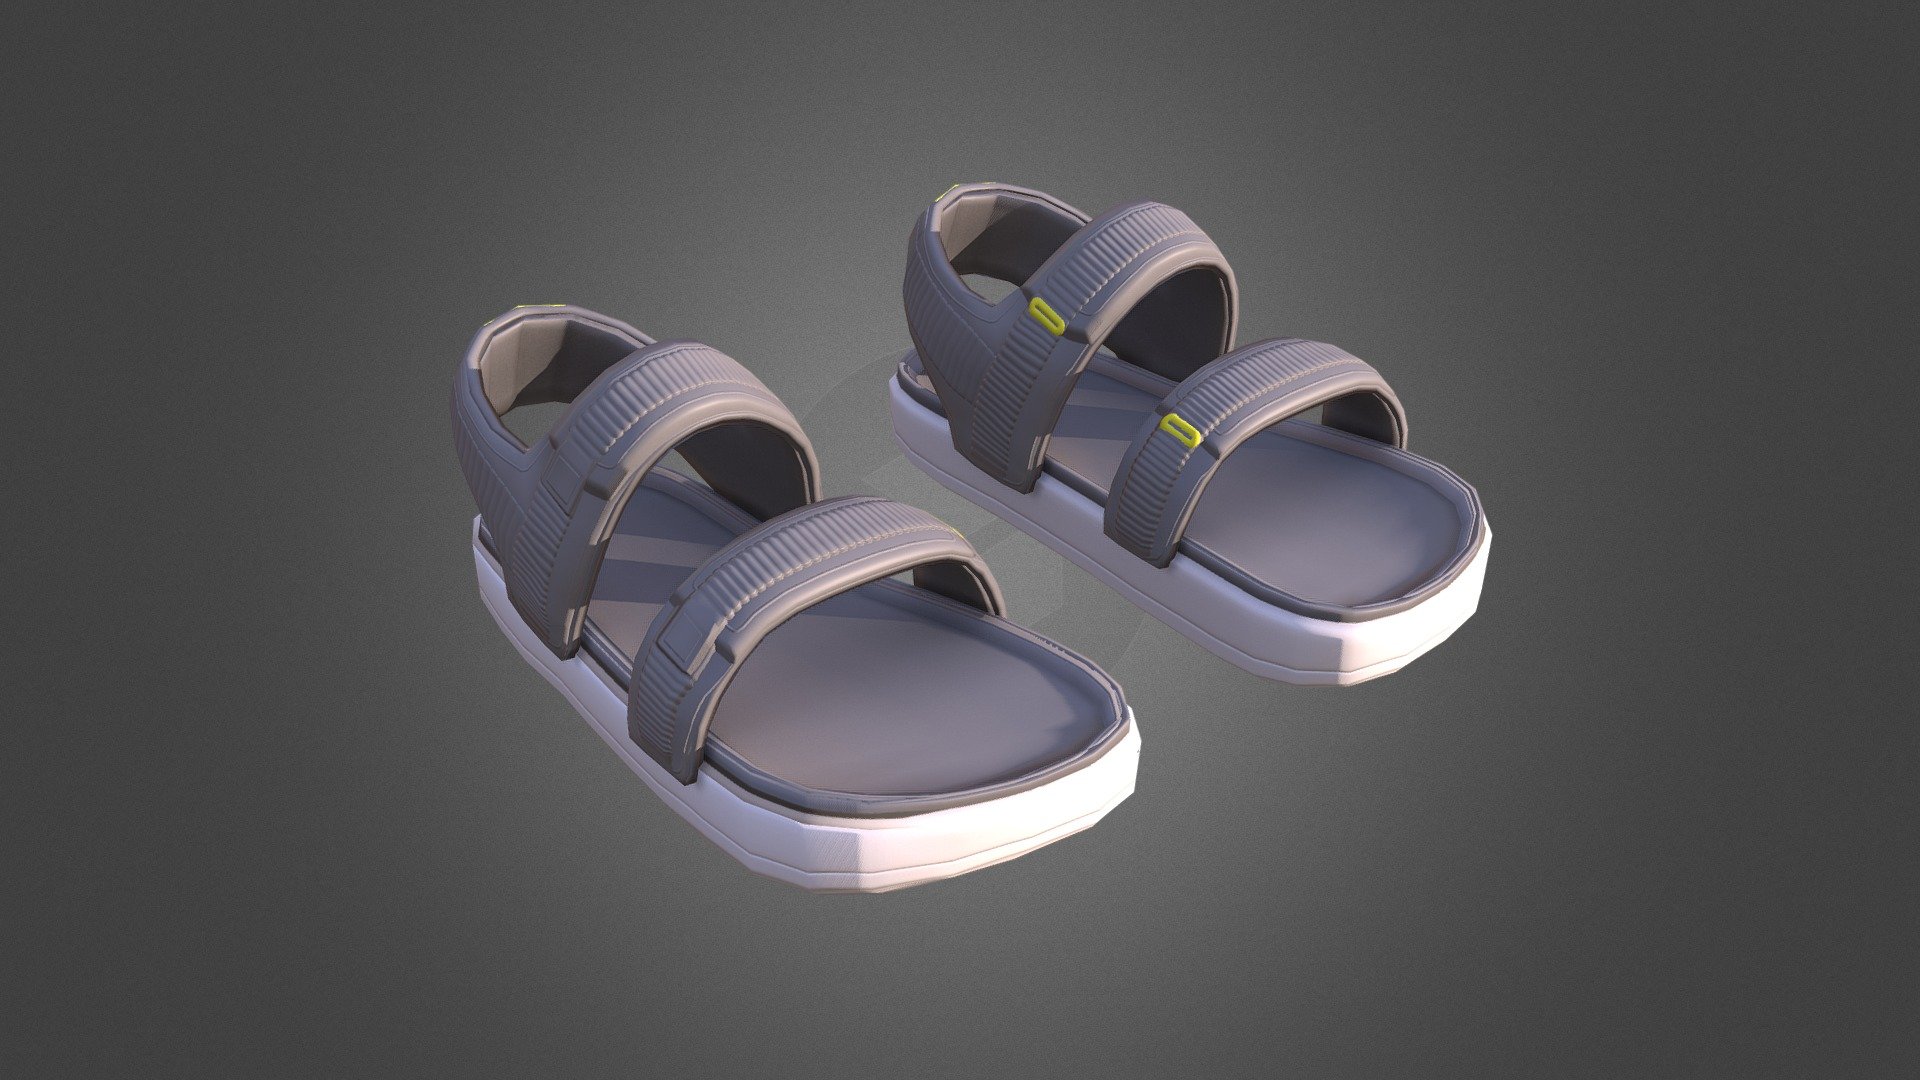 Textured model of sandals for stylized characters.
UV Mapped (and seams for Blender), base color and normal map already available. Works well with subdivision surface. The textures are shared with this model [ https://skfb.ly/ooyCt ] also available with a creative commons licence. Feel free to make new textures or even modify the model as long as I'm credited (as mentioned in the CC attribution). Works better in Blender with autosmooth and &ldquo;WeightedNormals